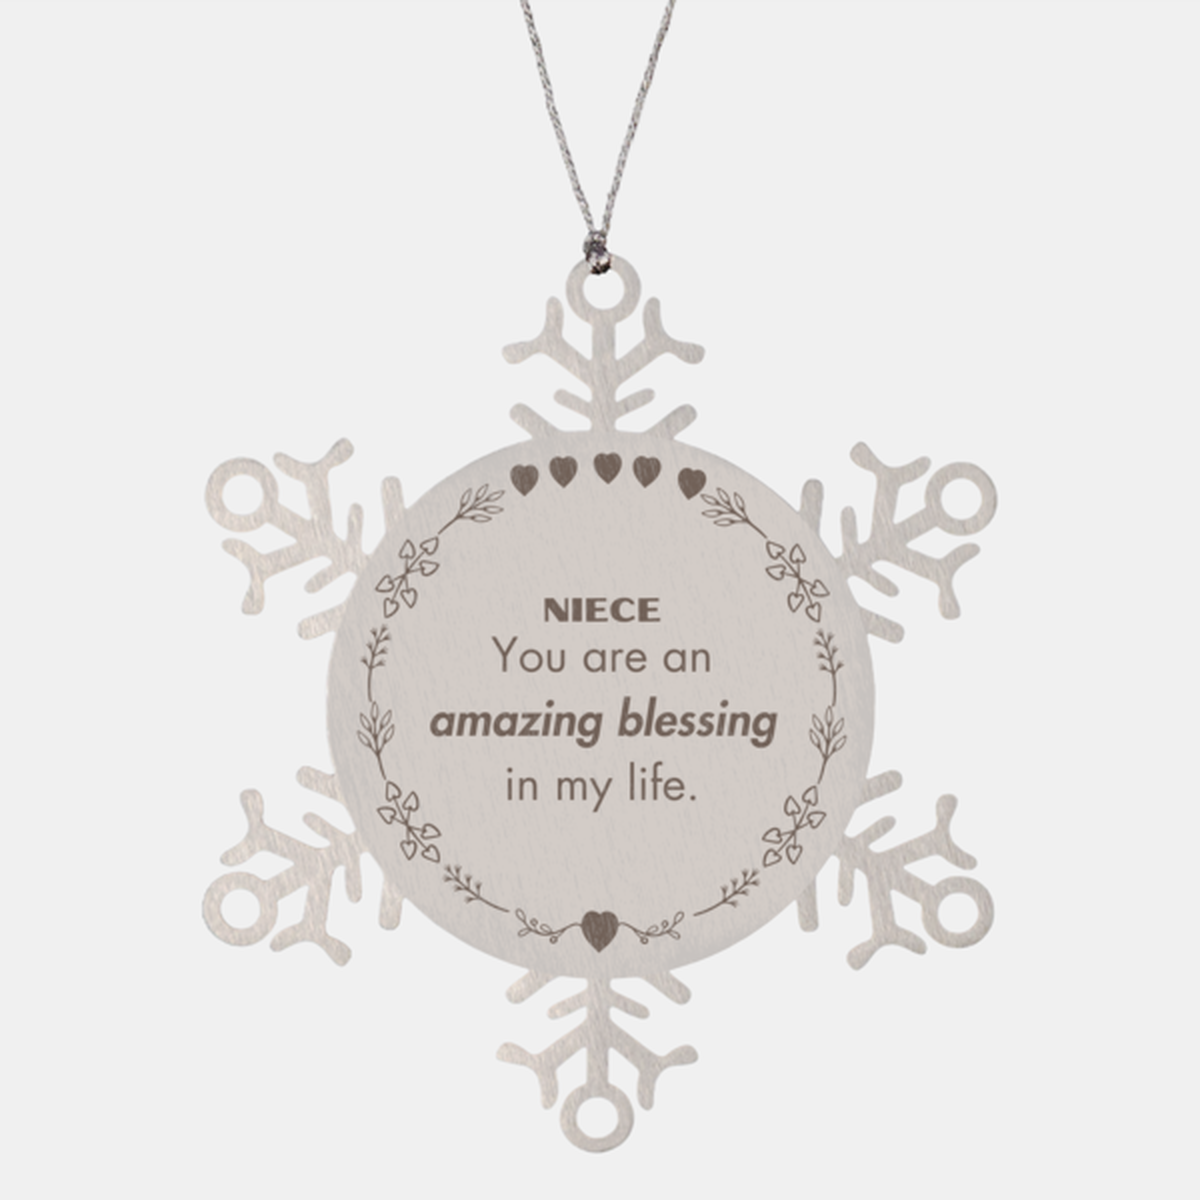 Niece Snowflake Ornament, You are an amazing blessing in my life, Thank You Gifts For Niece, Inspirational Birthday Christmas Unique Gifts For Niece